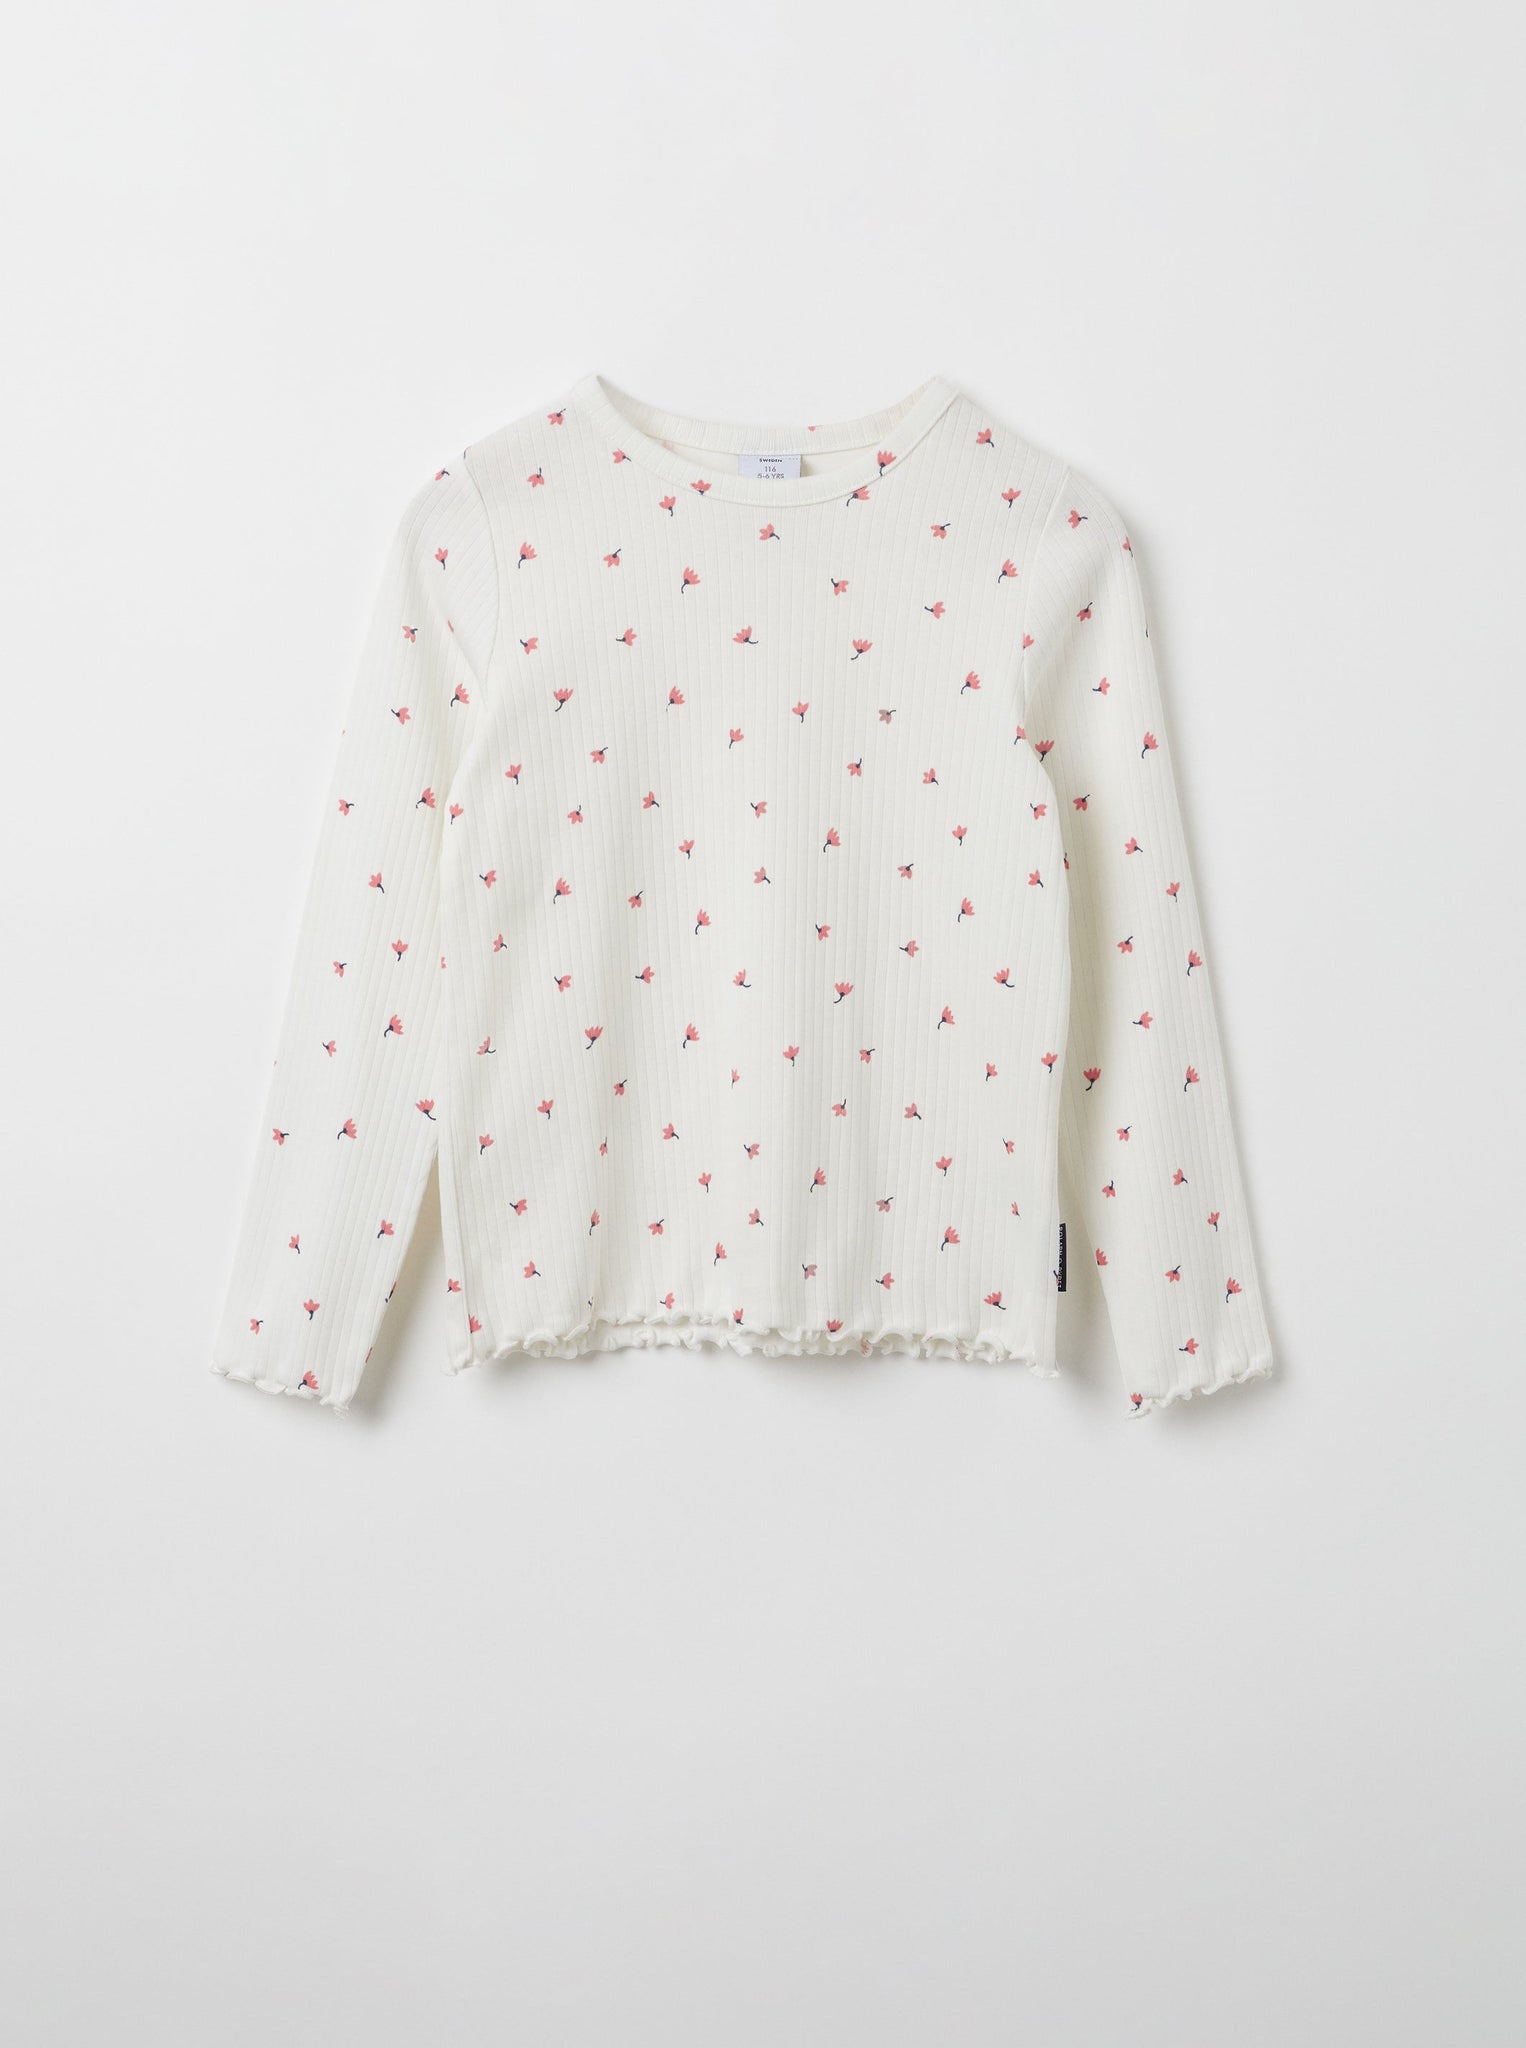 Organic Cotton White Floral Girls Top from the Polarn O. Pyret kidswear collection. The best ethical kids clothes